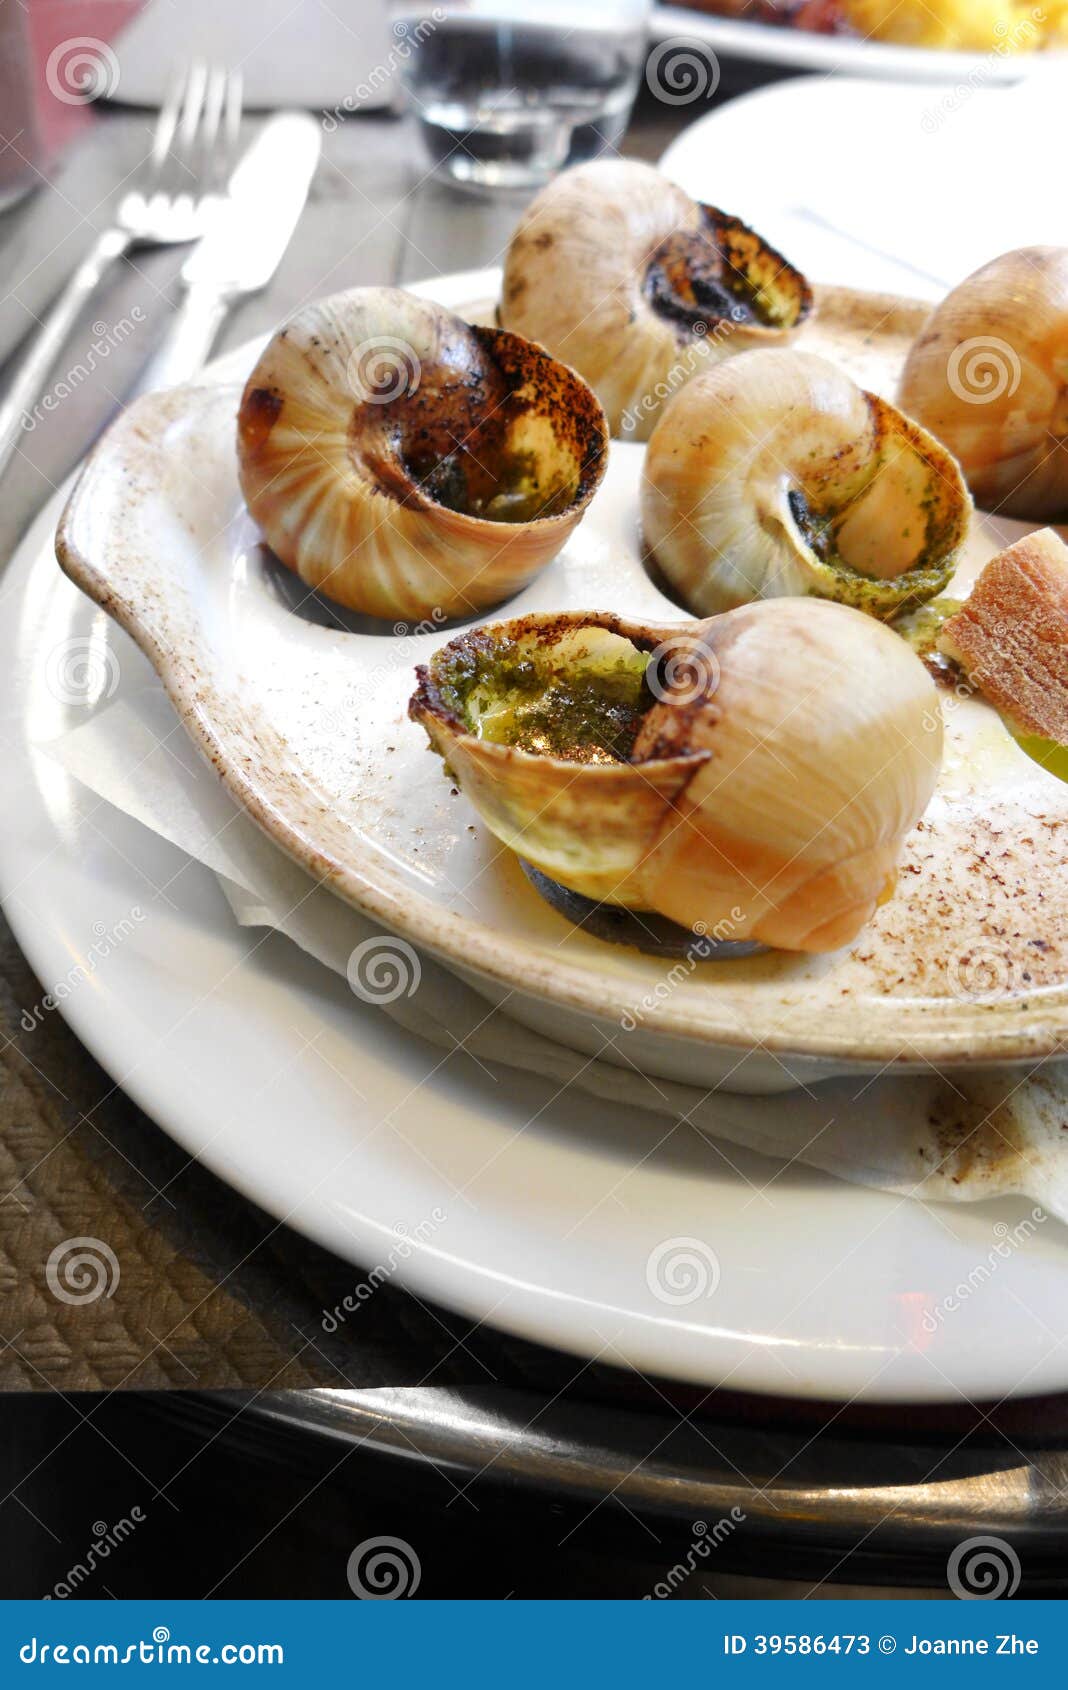 escargots snails in french restaurant cafe